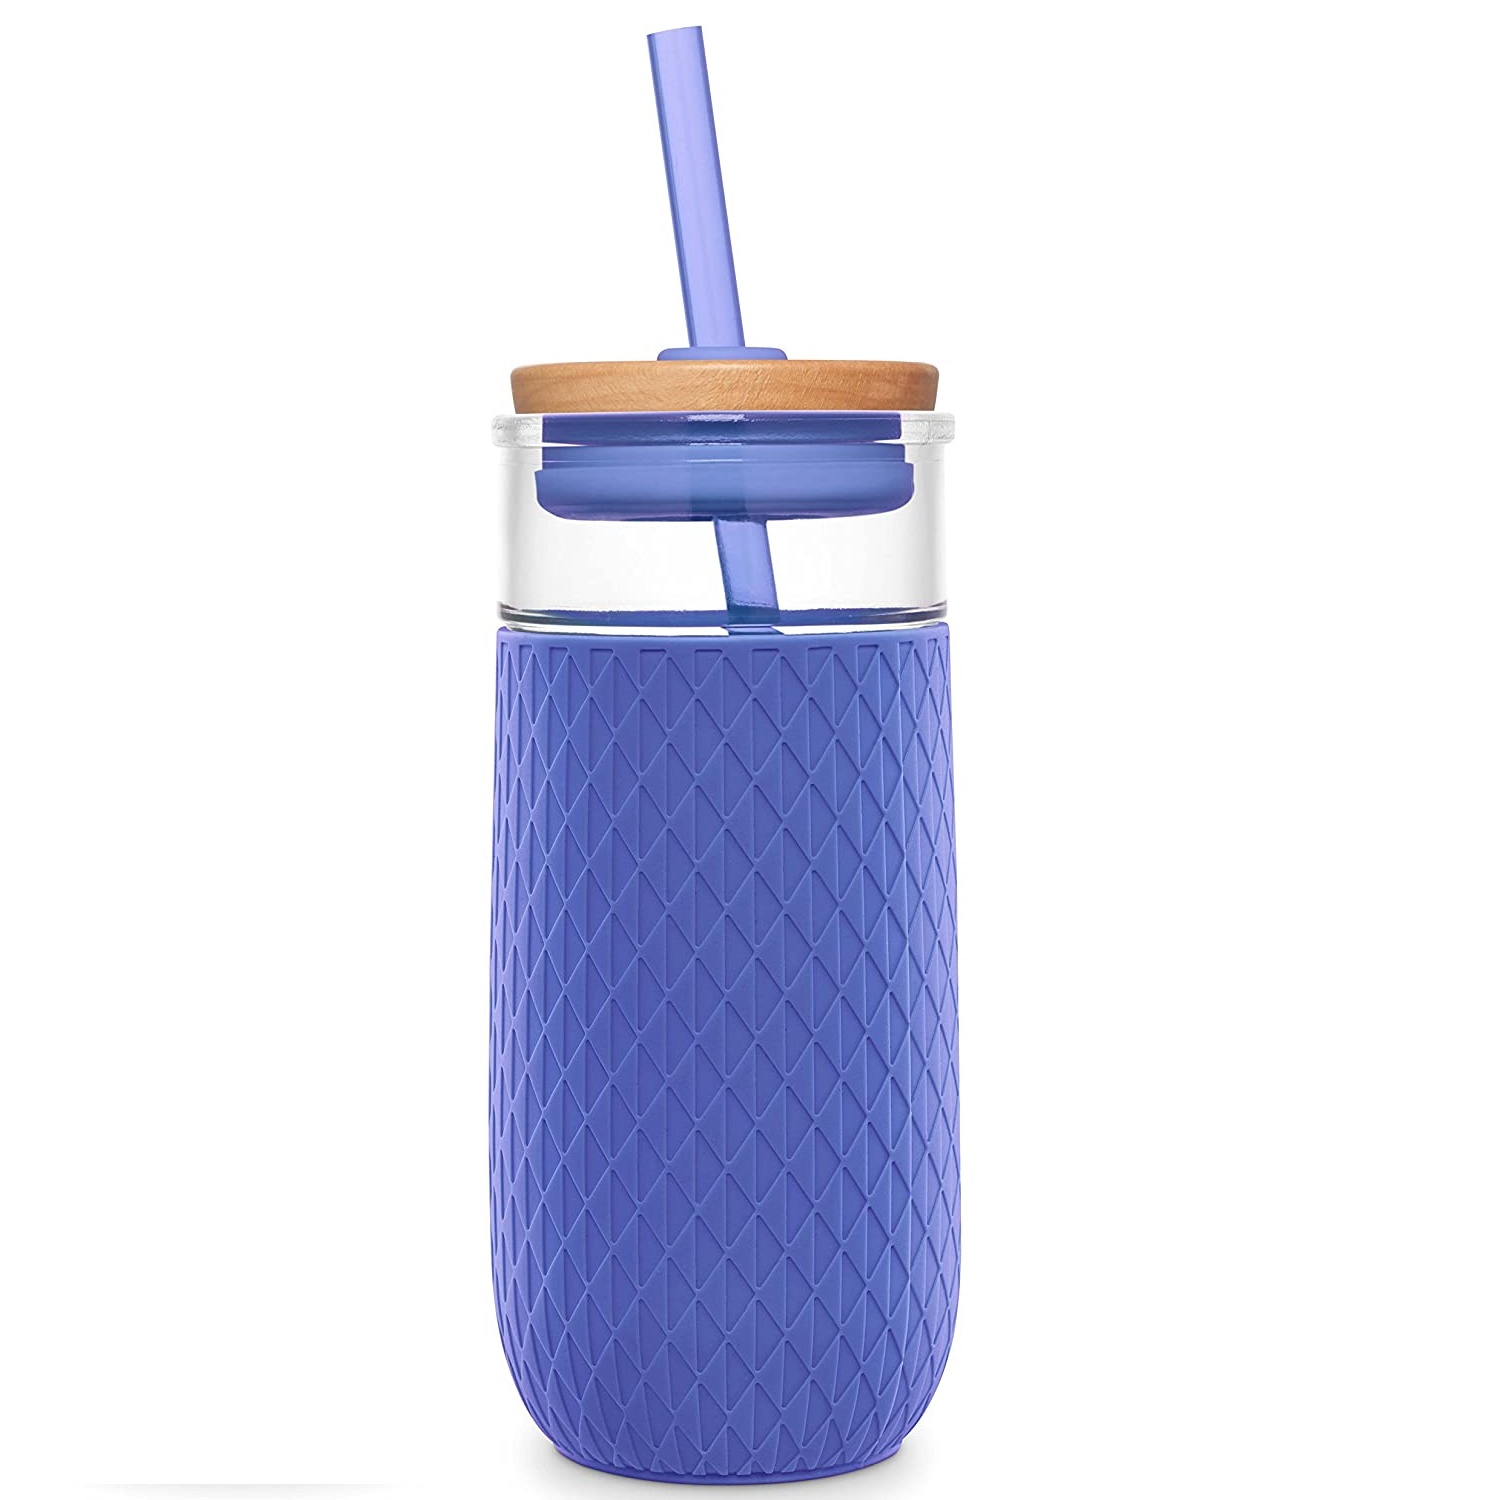 Newly Arrival Stainless Steel Tumbler 16 Oz - Wholesale 20oz Custom Colored Drinking Glass Tumbler with Silicone Sleeve and Bamboo Lid – SUNSUM